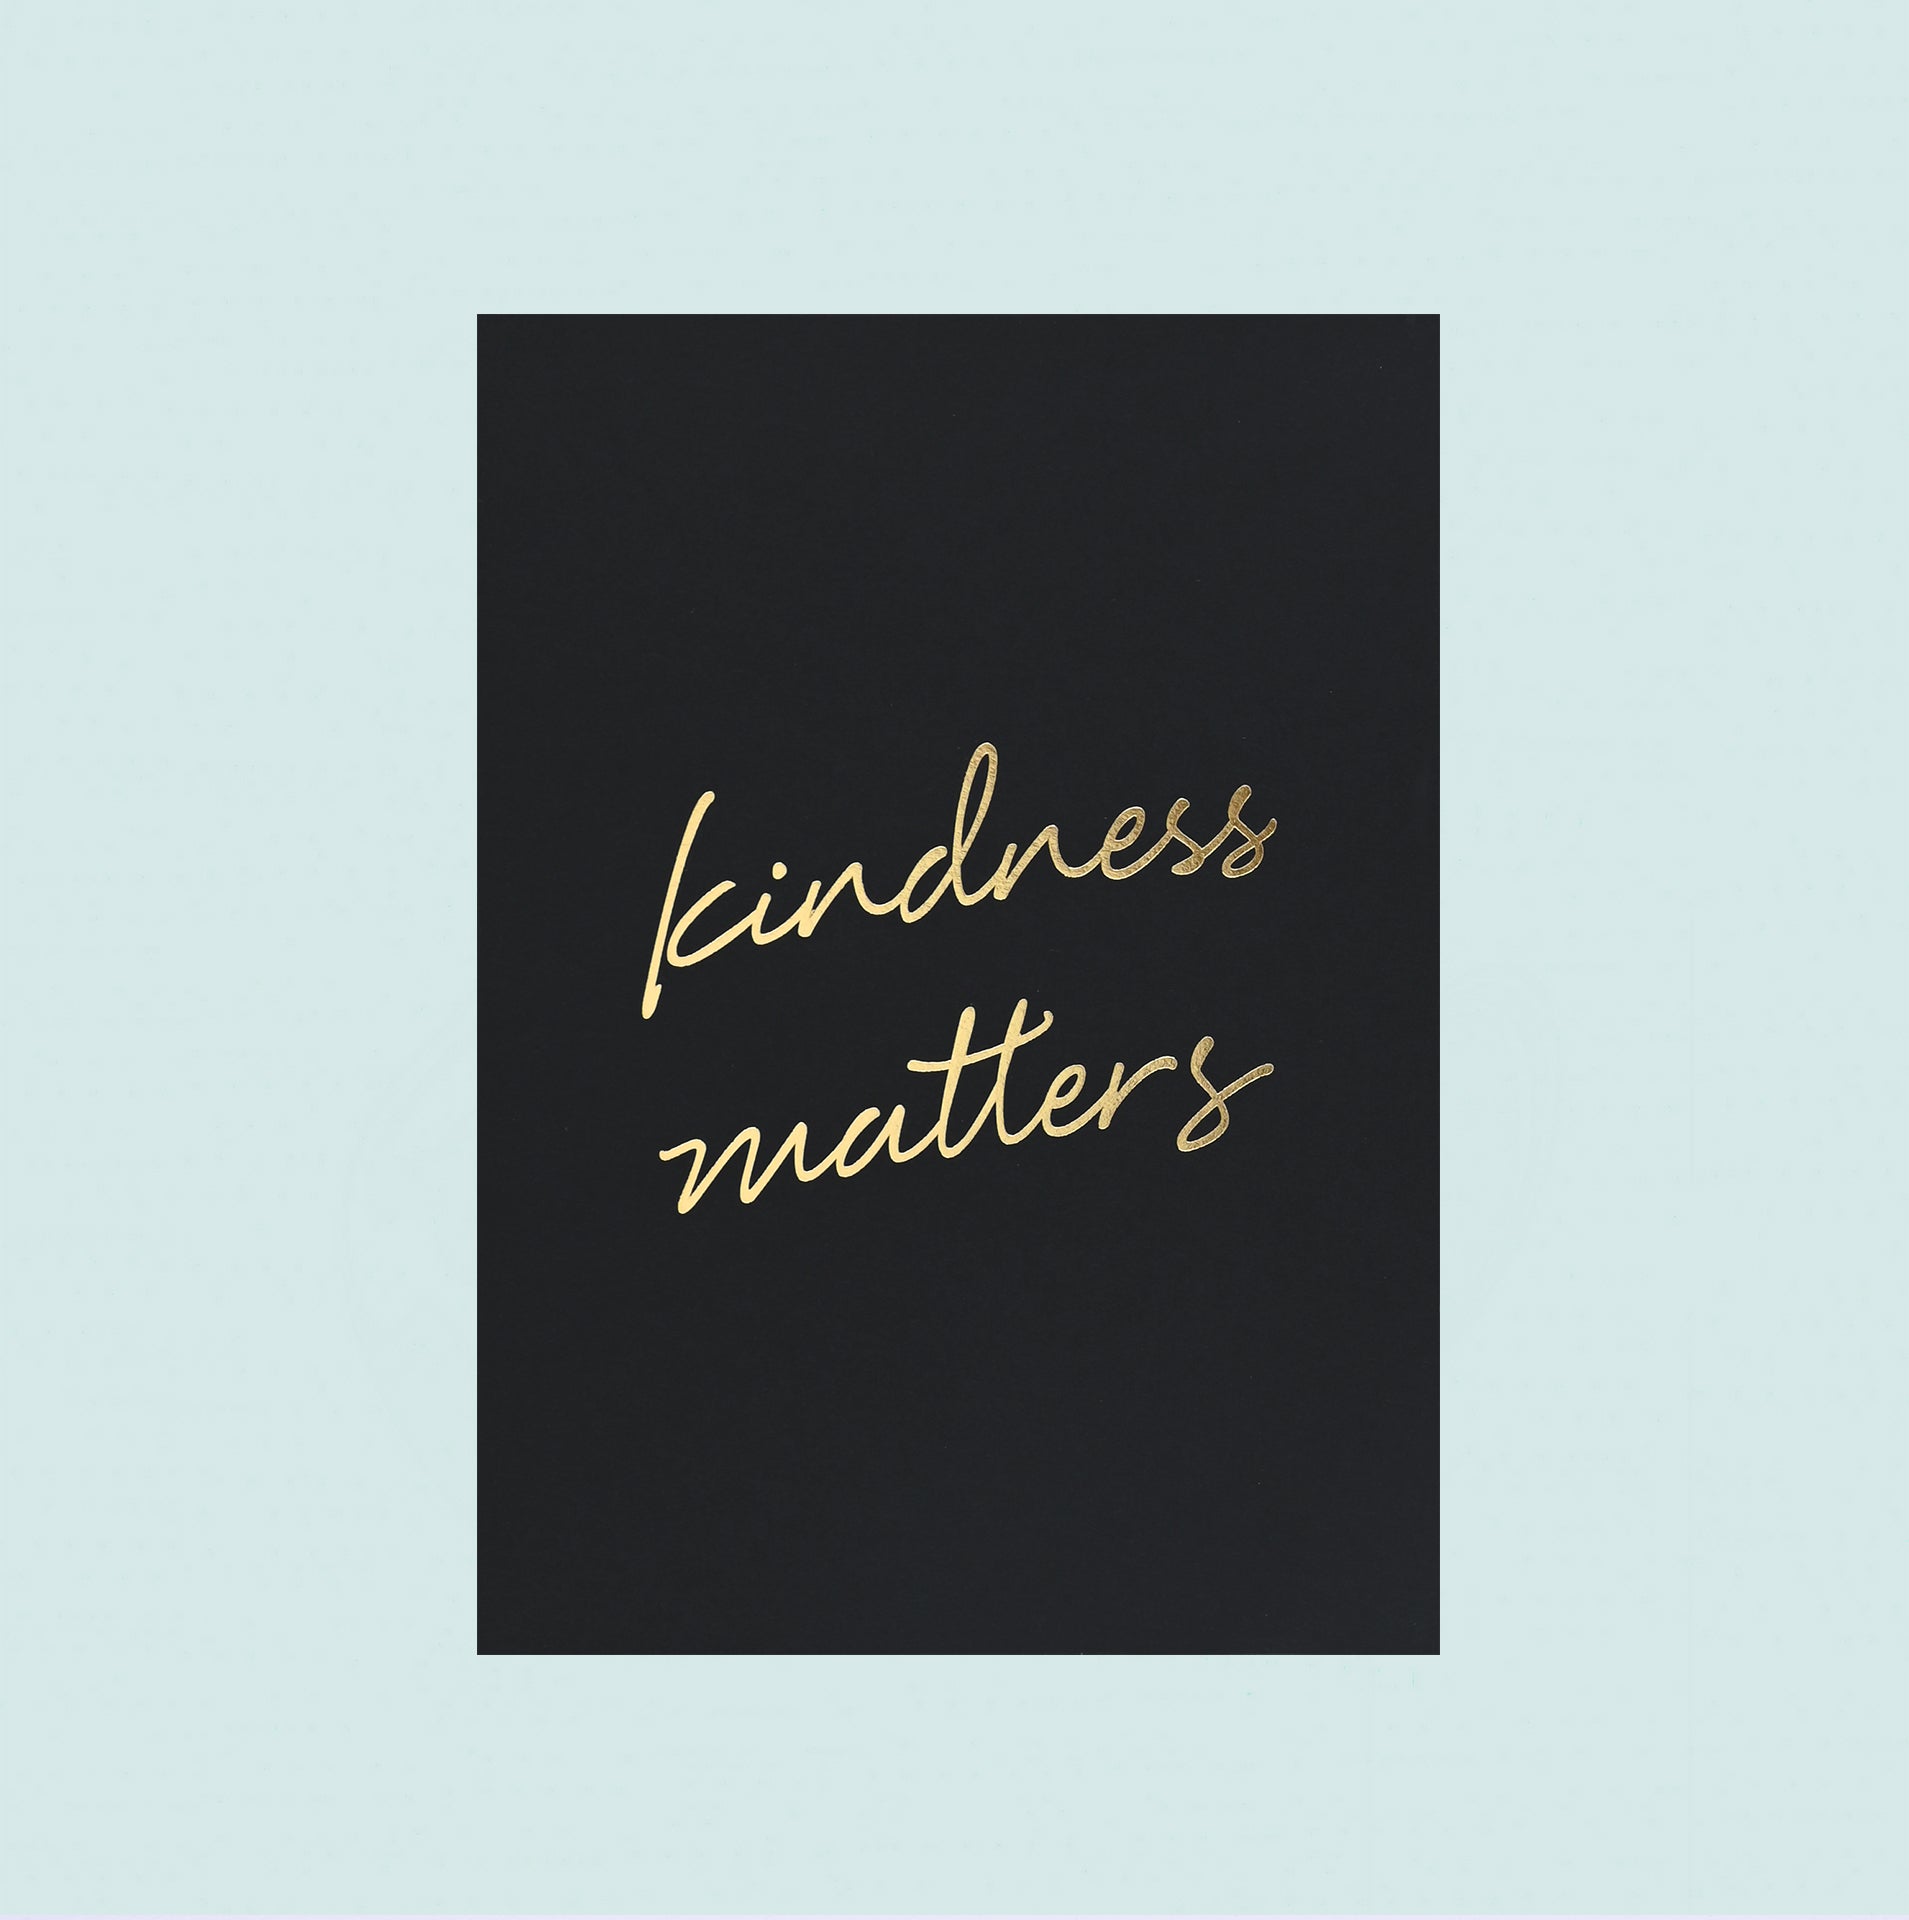 Wrinkle and Crease Kindness Matters Print Black 